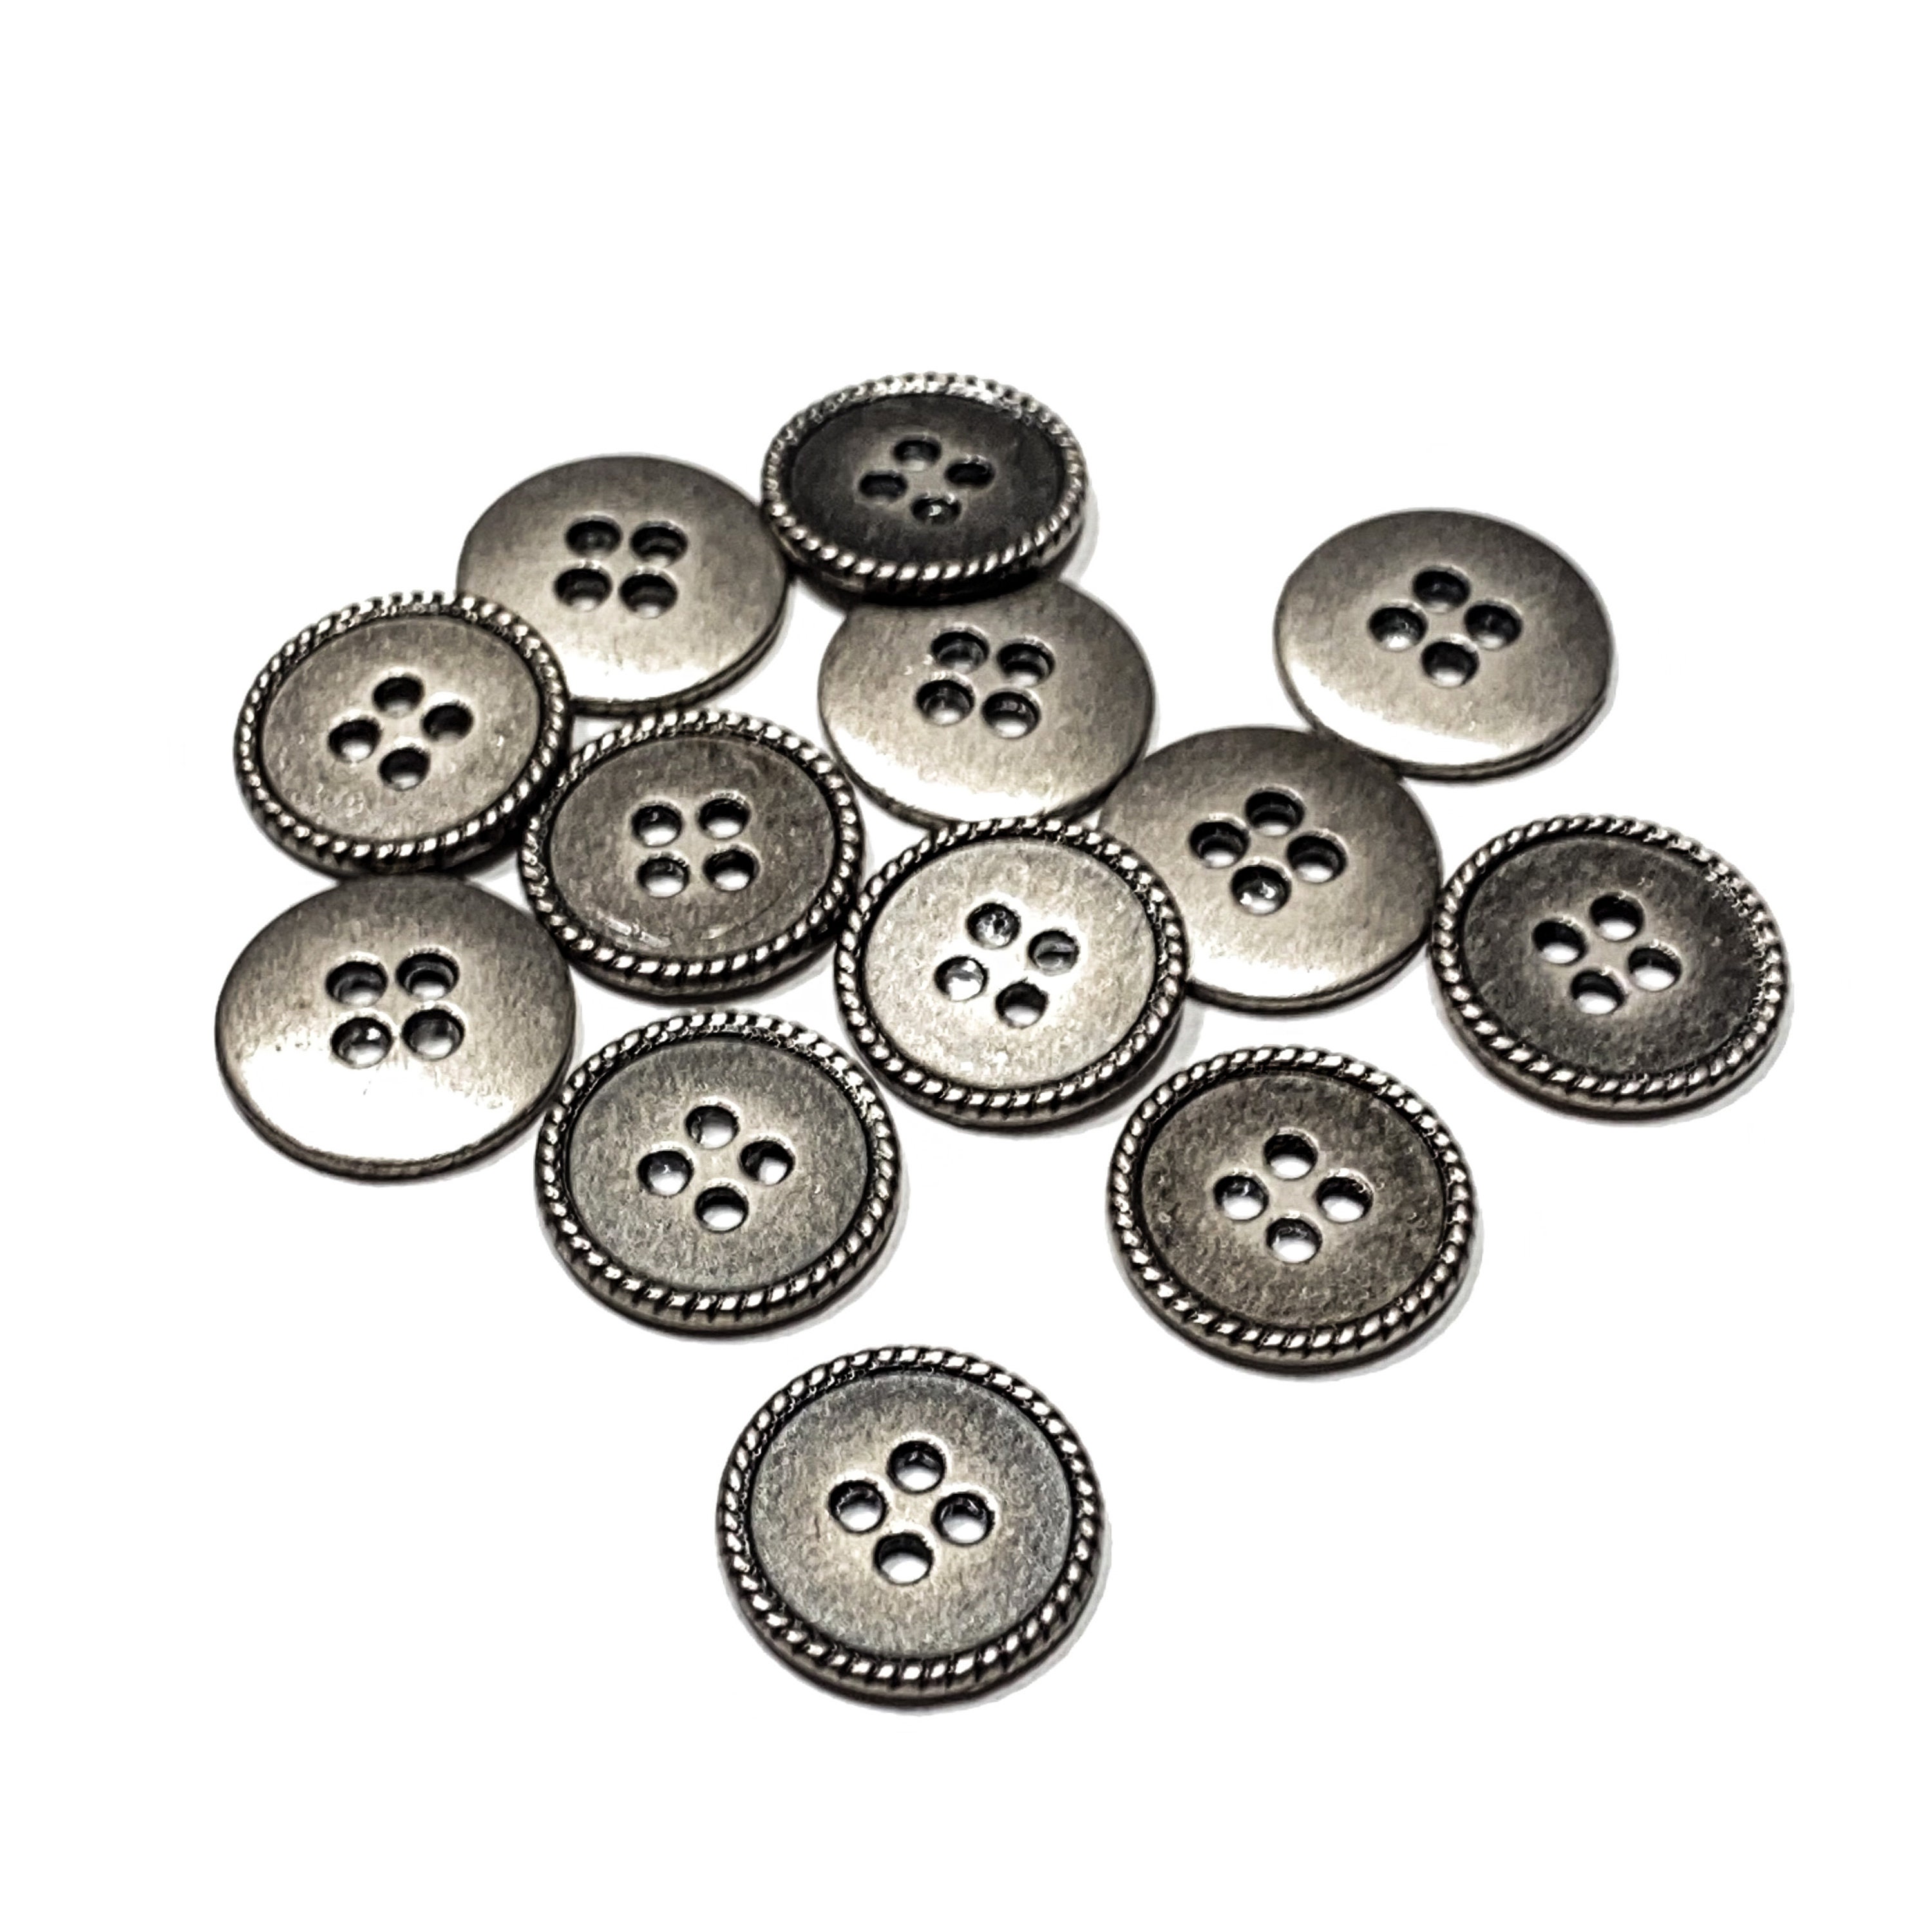 Silver Rim Rhinestone Buttons 5/8 (15mm) 24L Vintage Metal Buttons #821